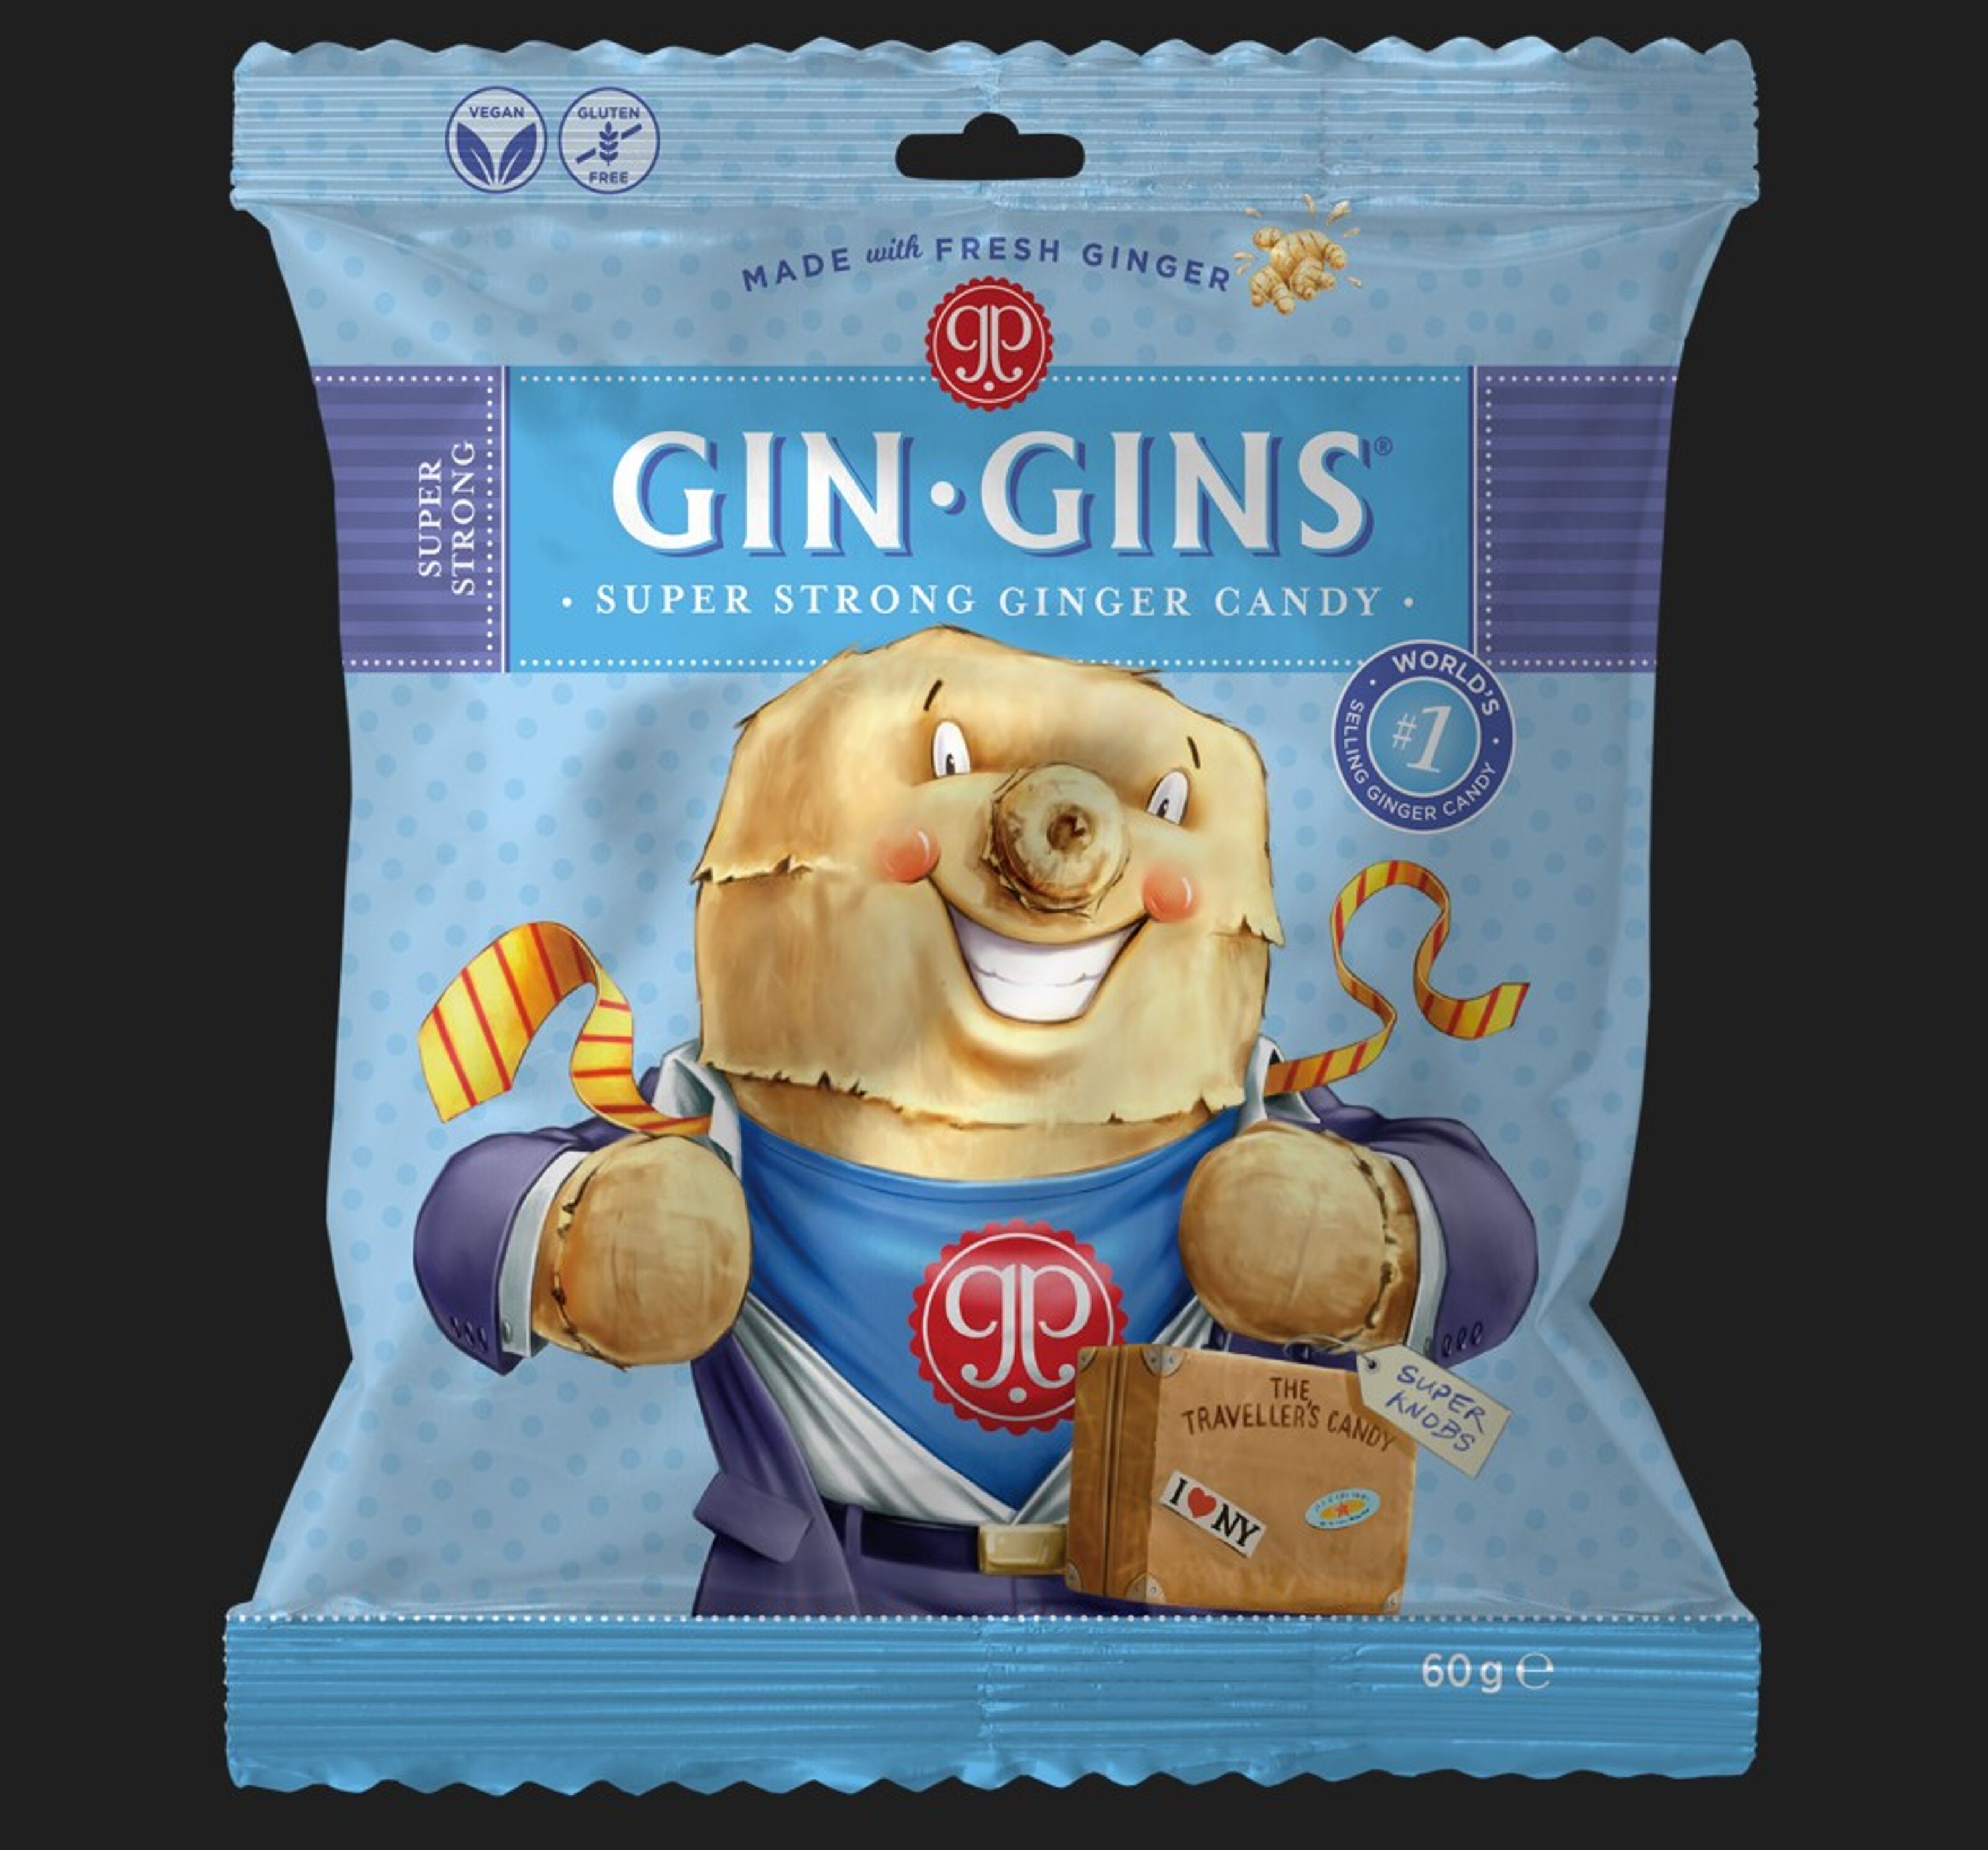 Bonbons puissants au gingembre Gin Gins - The Ginger People